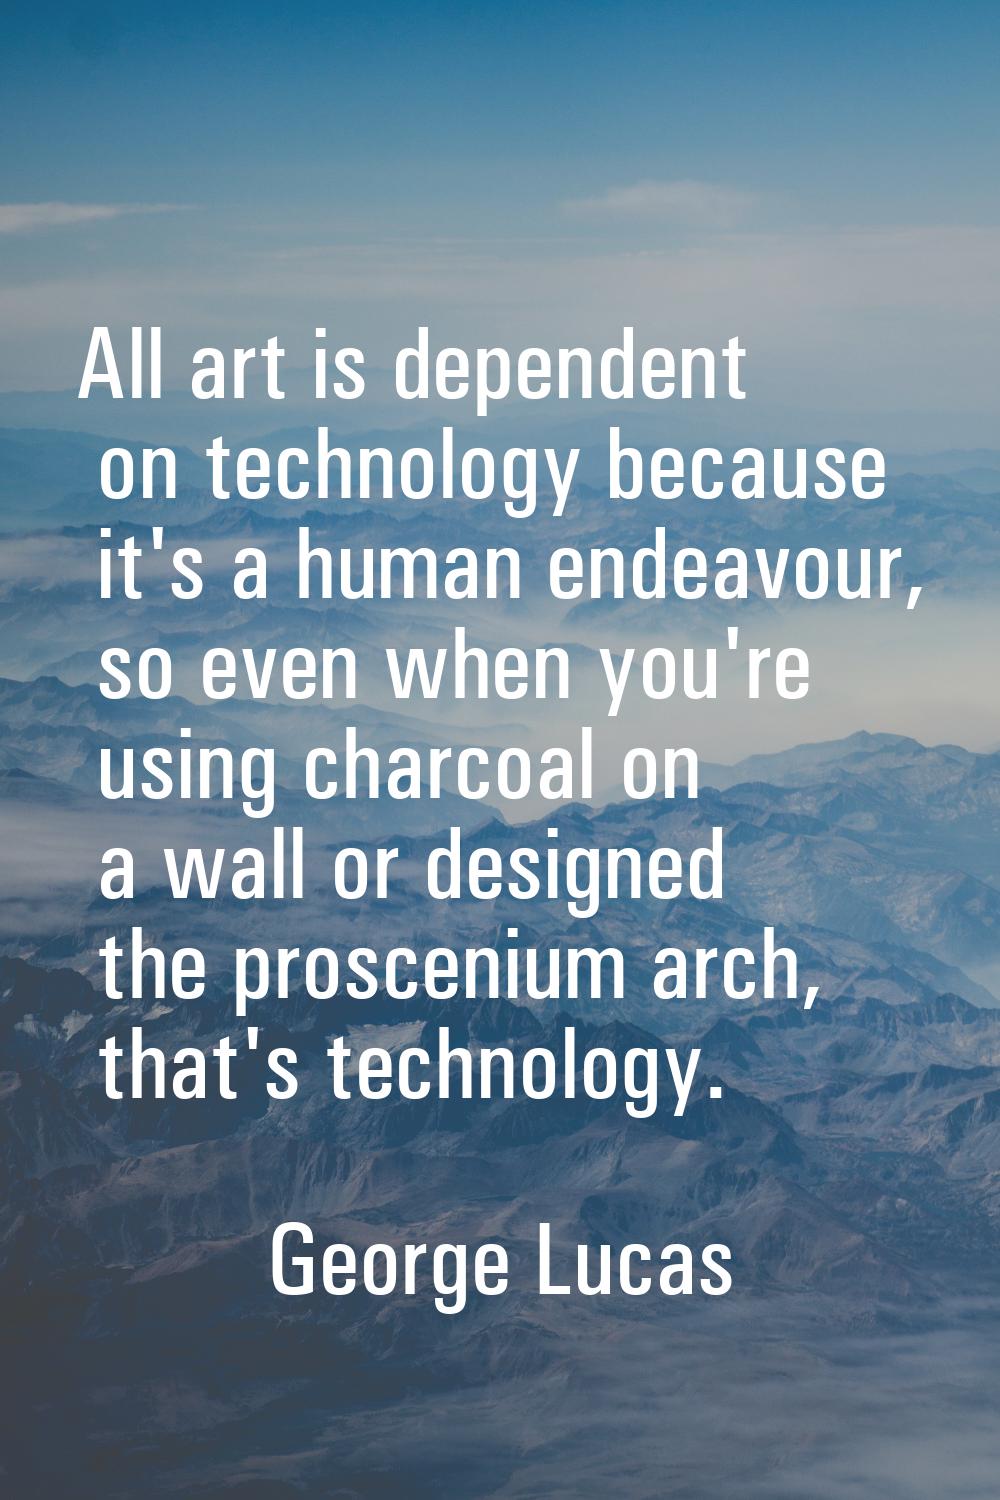 All art is dependent on technology because it's a human endeavour, so even when you're using charco